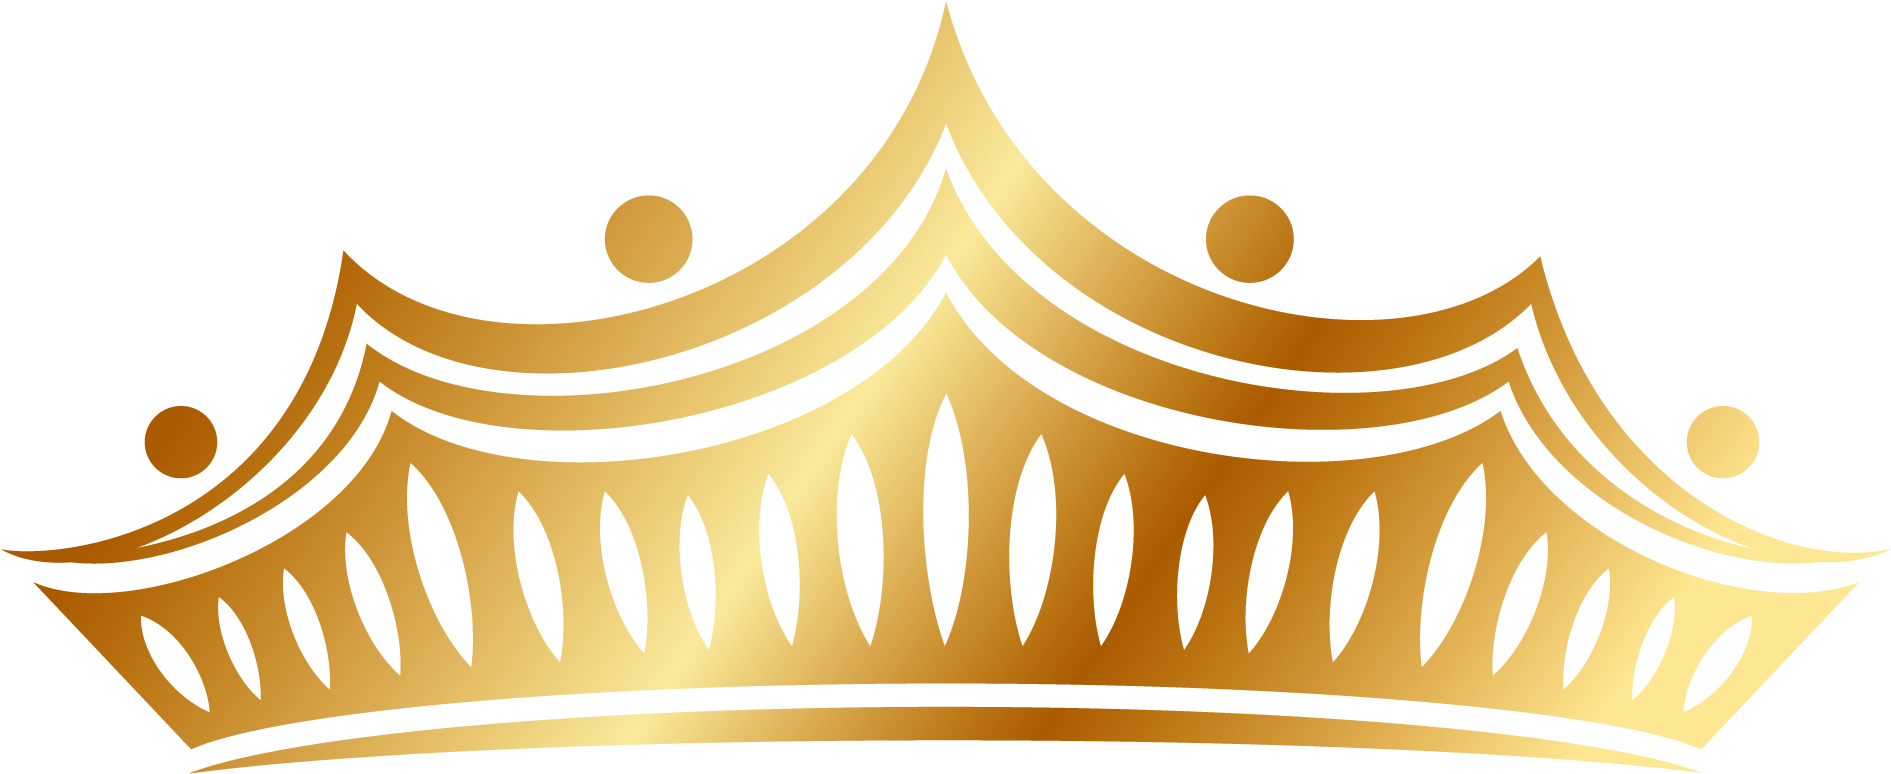 Clash Royale Icon - Golden Crown Vector Png - (2126x2126) Png Clipart ...